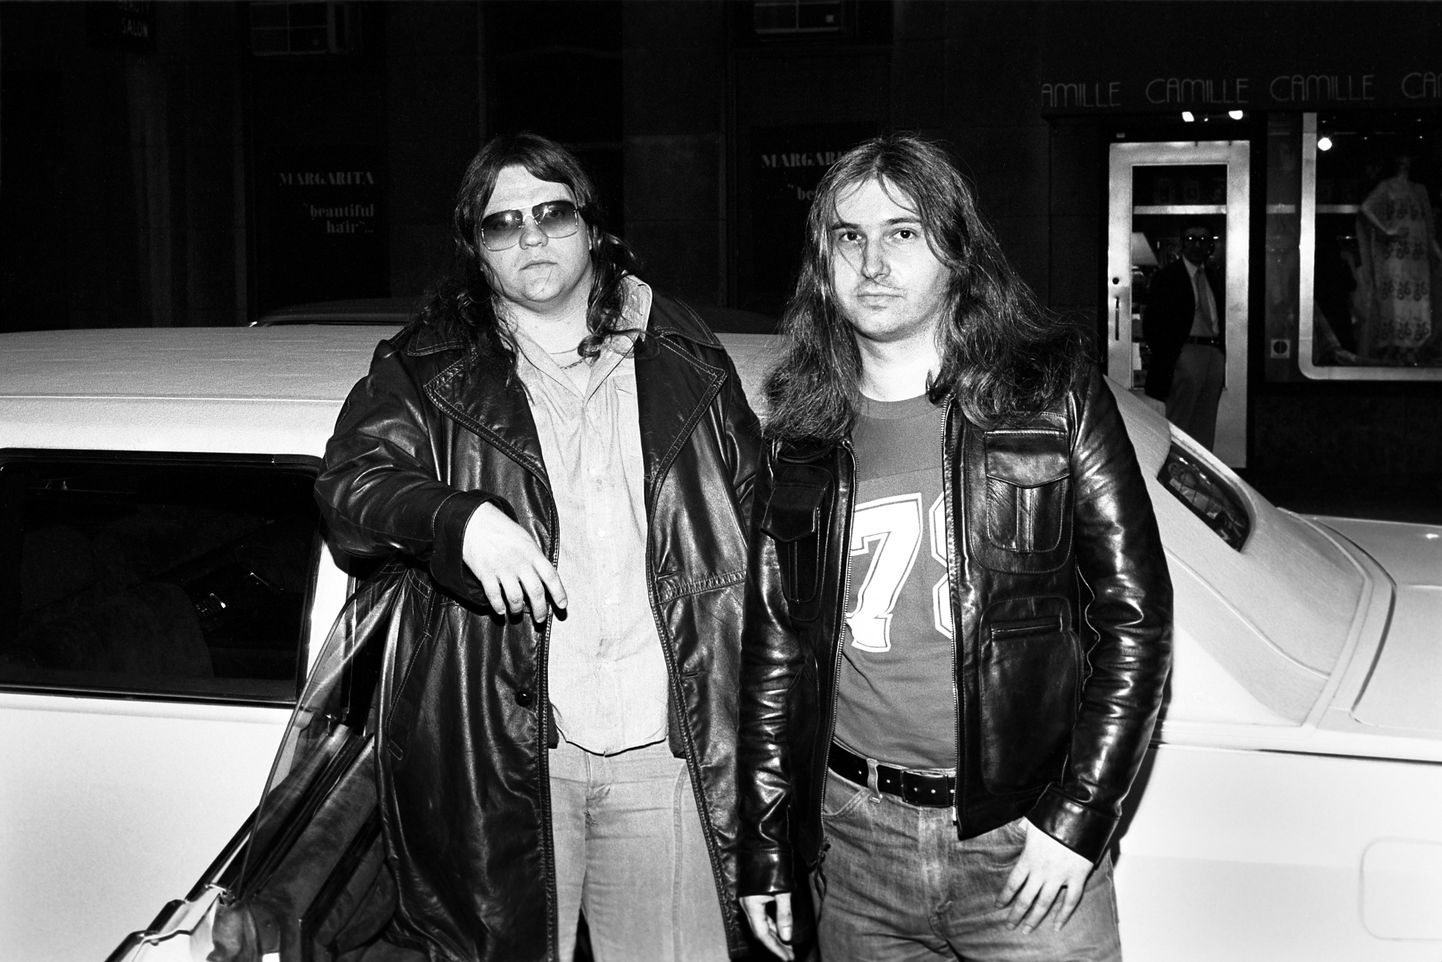 **FILE PHOTO** Jim Steinman Has Passed Away at 73.

Meatloaf & Jim Steinman arriving for a radio interview at WMMR to promote the album Bat Out of Hell.
Philadelphia, PA,March, 1977.
CAP/MPI09
©MPI09/Capital Pictures